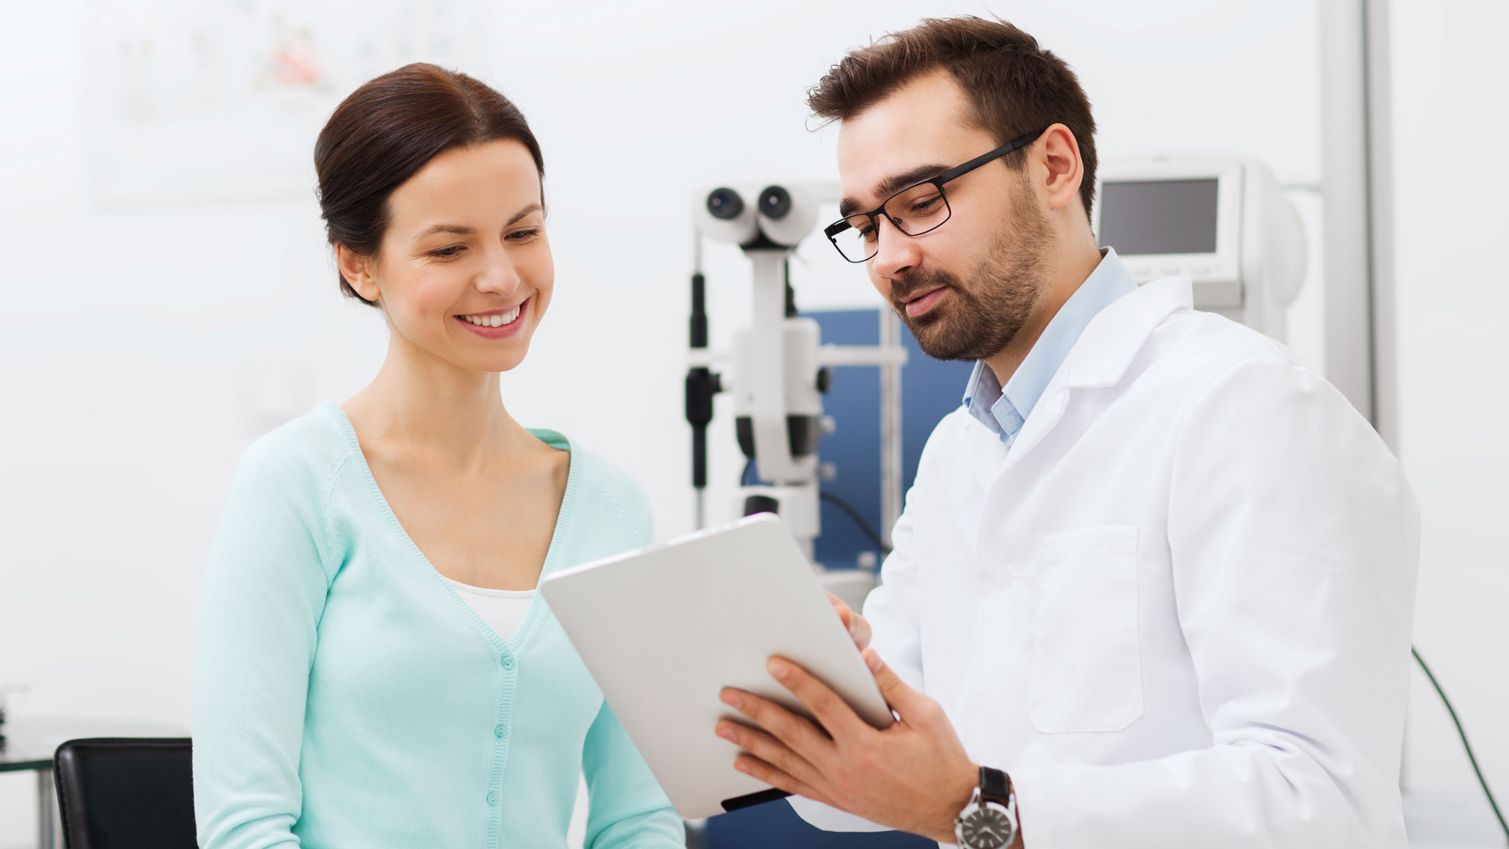 An eye doctor uses tablet while patient looks on. 